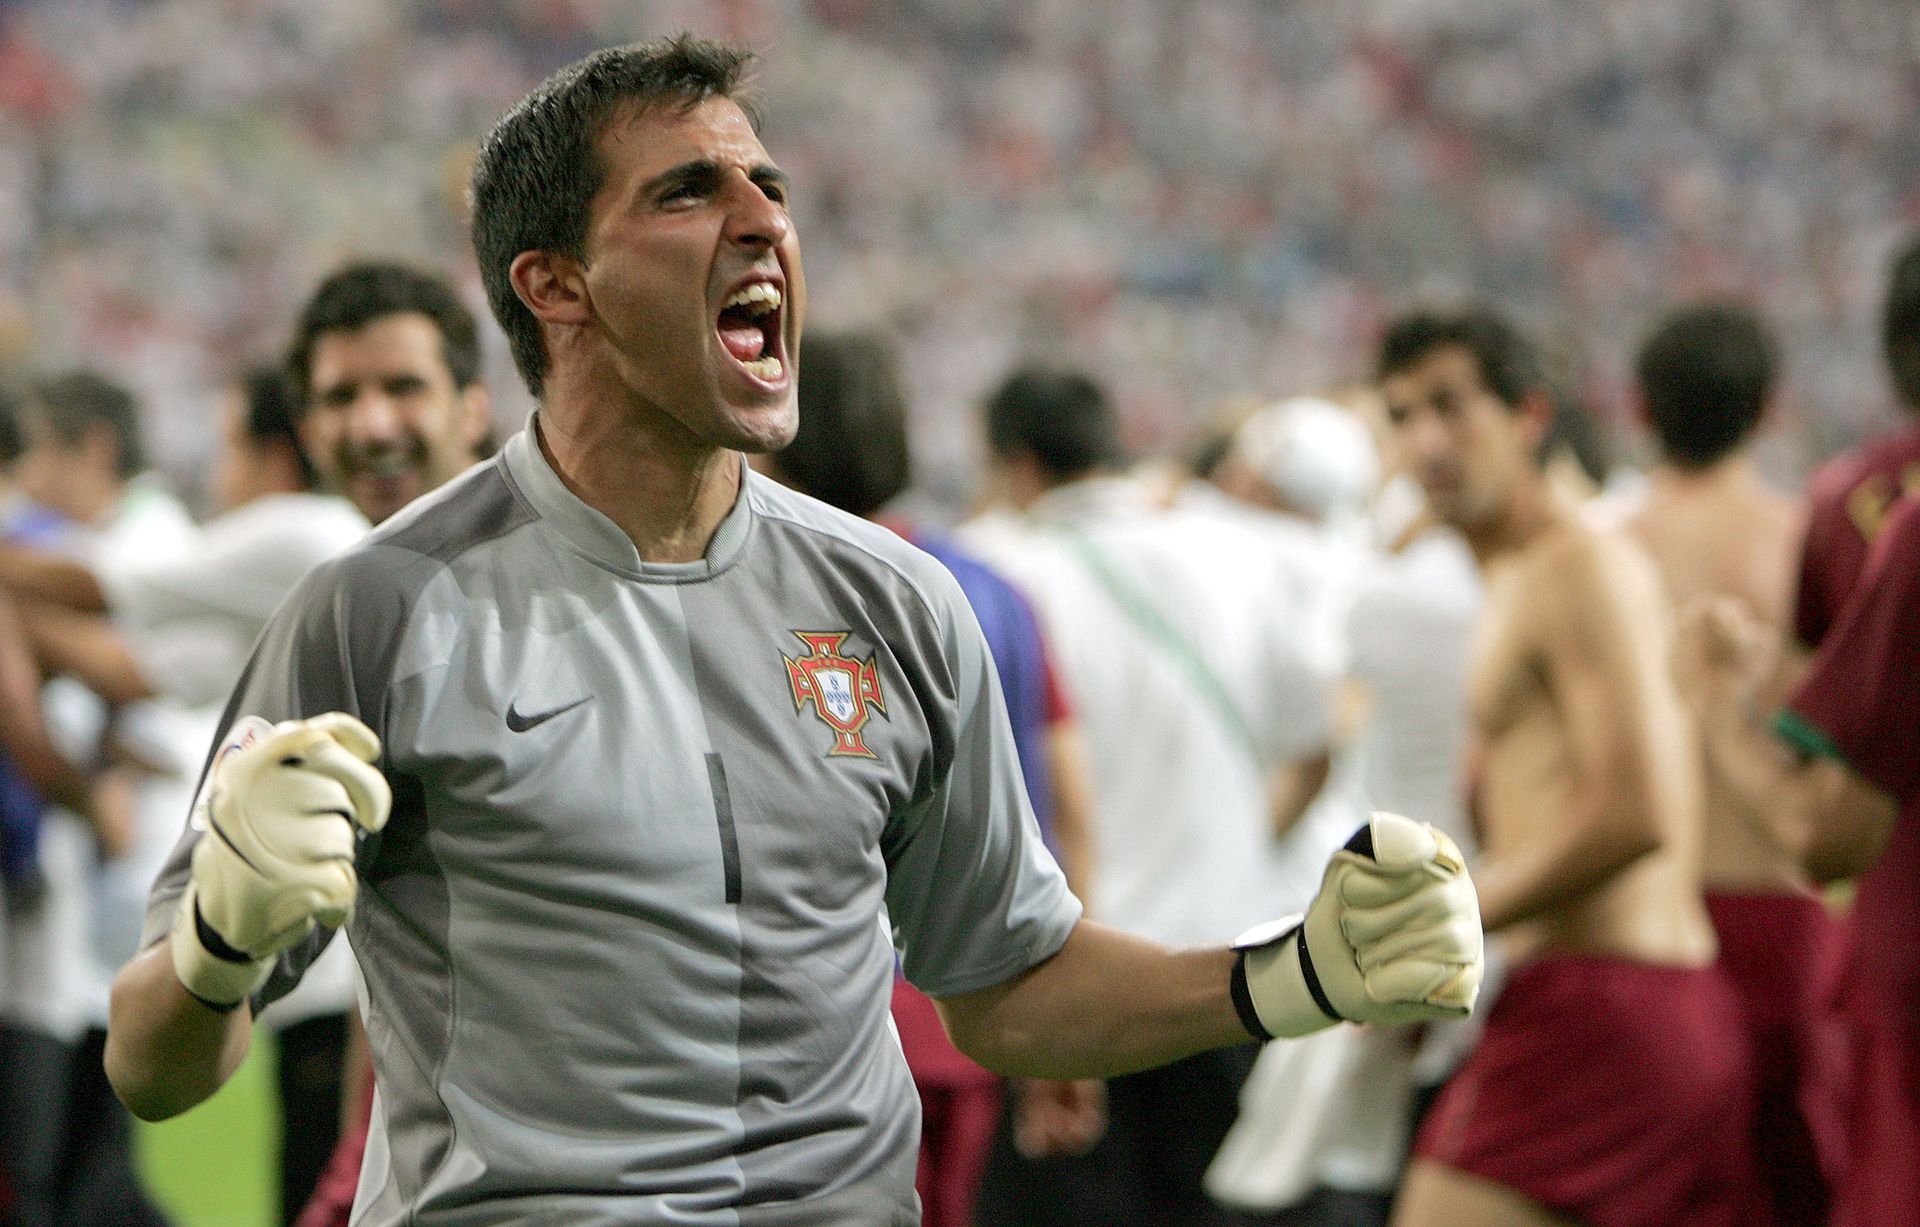 <p>                     Ricardo won 79 caps for Portugal and all of those came in the 2000s – between 2001 and 2008.                   </p>                                      <p>                     At Euro 2004, he saved one penalty and scored the decisive spot-kick against England in the quarter-finals. At the World Cup two years later, he saved three penalties in a shootout as the Portuguese knocked out England again in the last eight.                   </p>